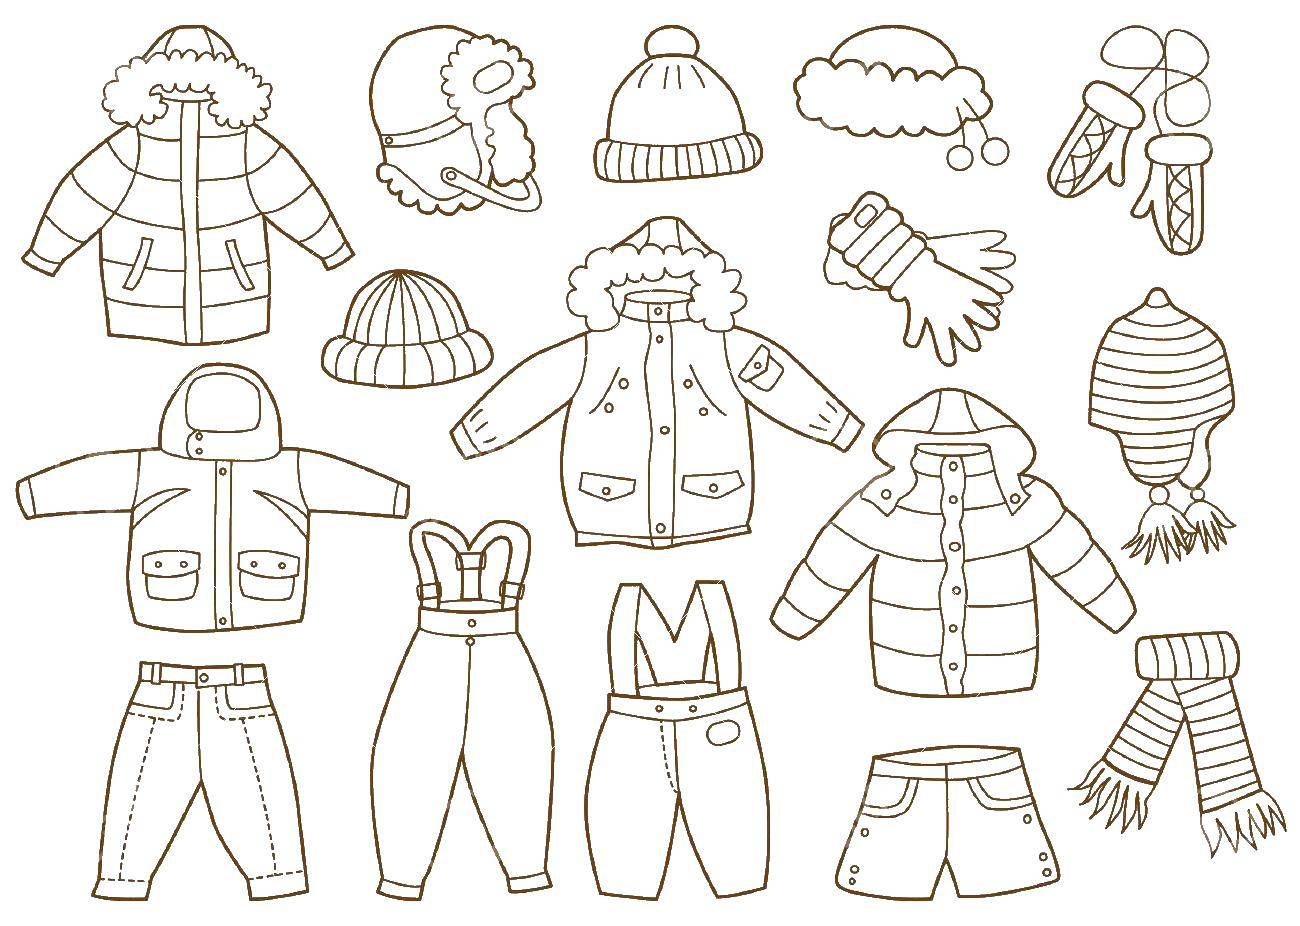 Coloring A change of clothes, gloves, hats. Category clothing. Tags:  clothing, gloves, hats.